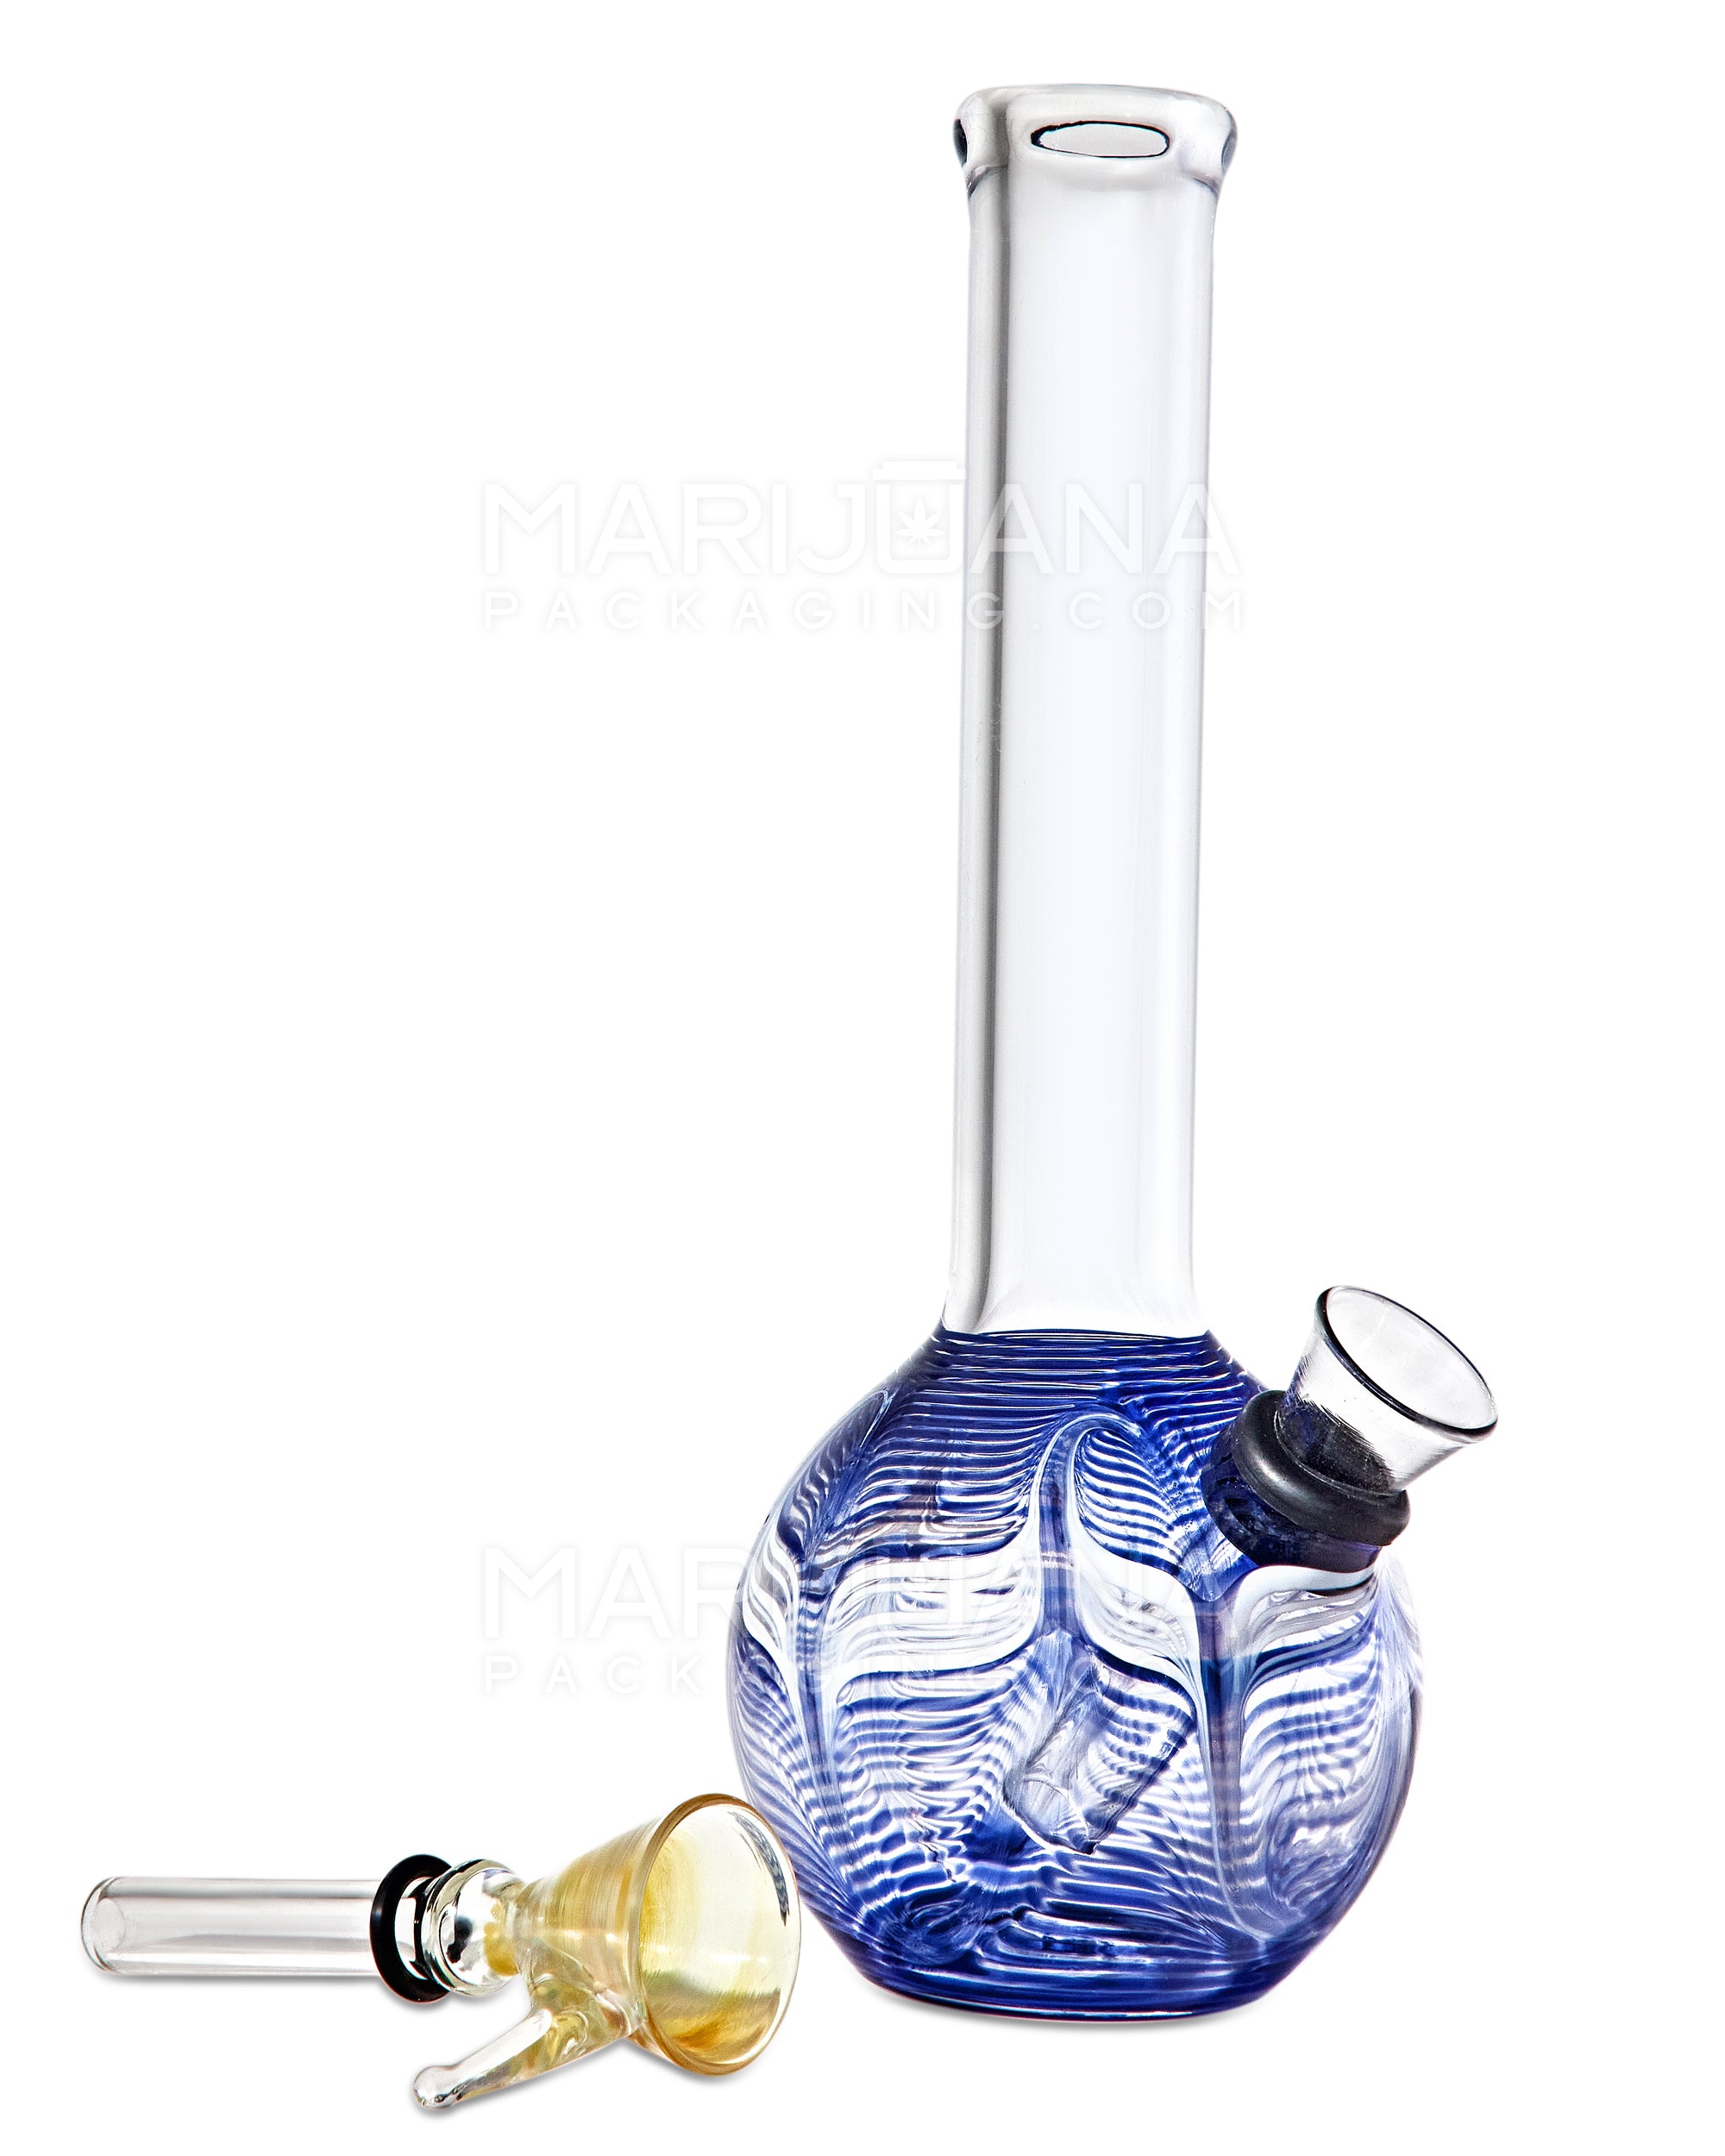 USA Color Manufacture High Quality Glass Water Pipe Glass Smoking